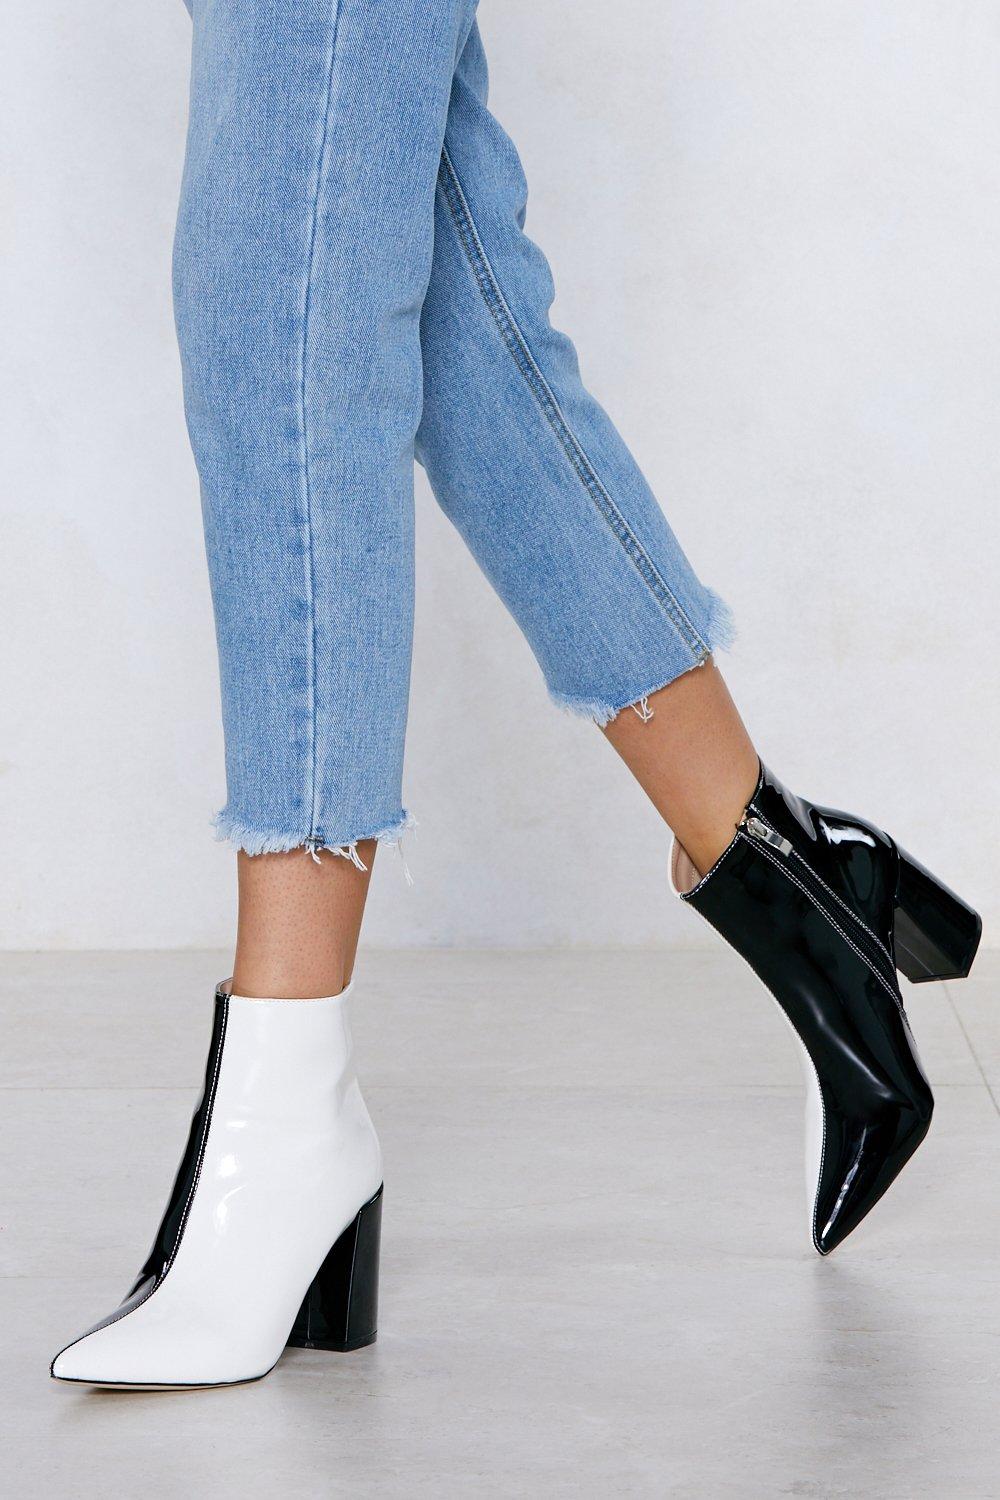 Opposites Attract Two-Tone Boot | Nasty Gal